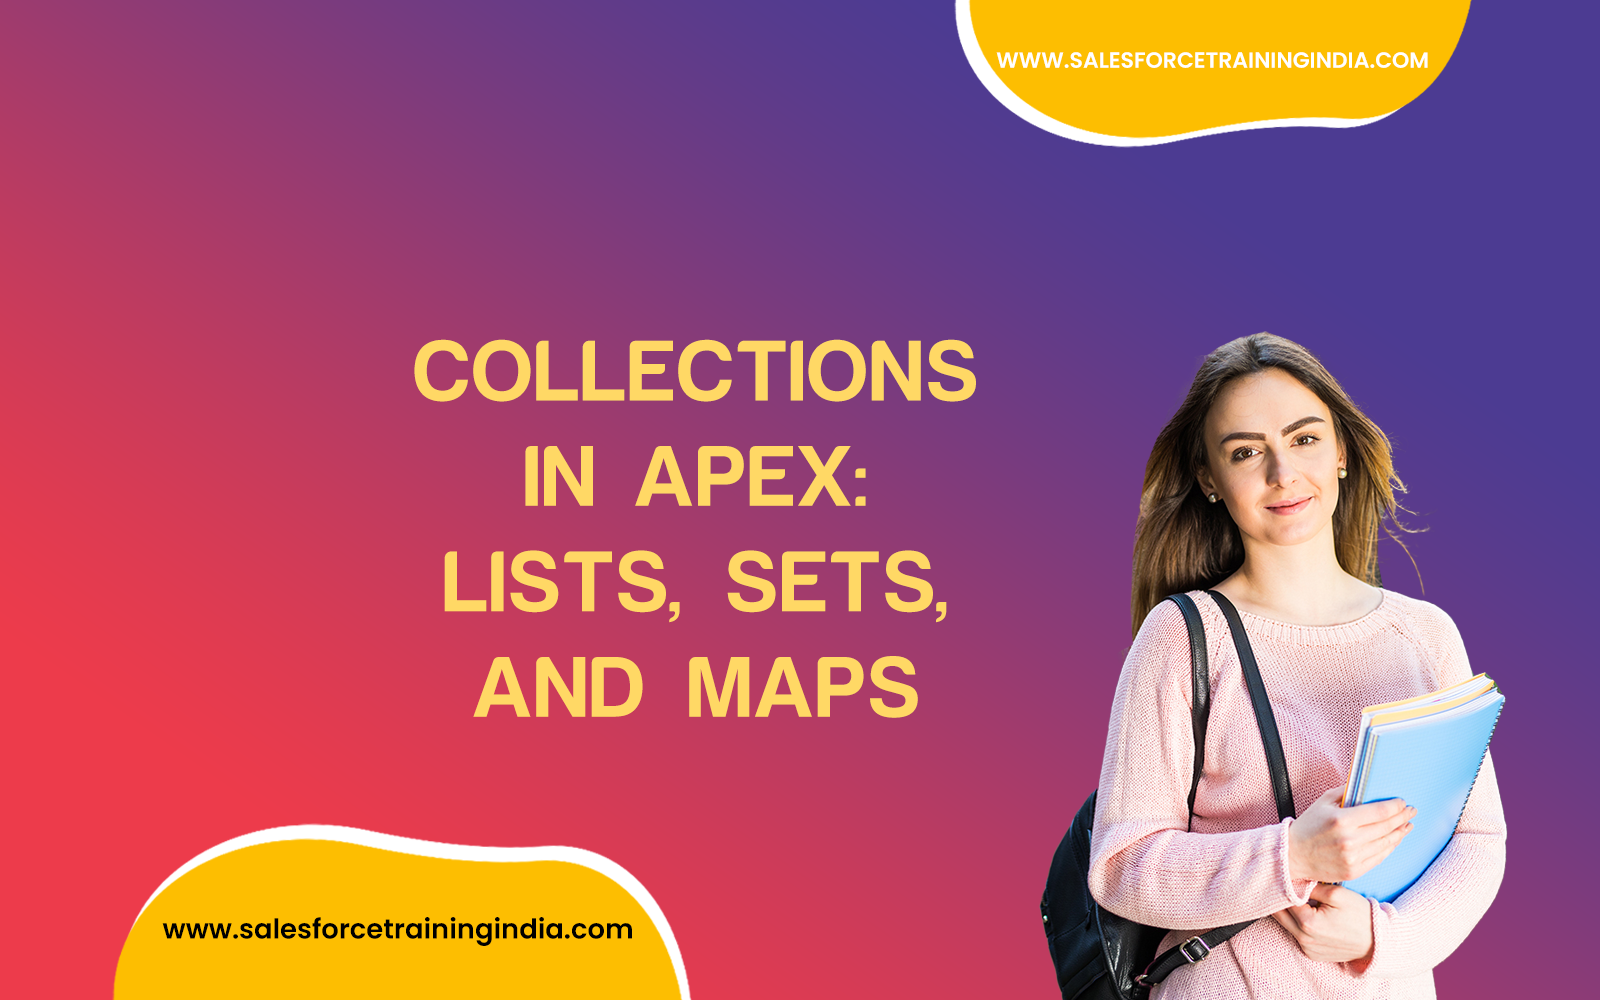 Collections in Apex: Lists, Sets, and Maps